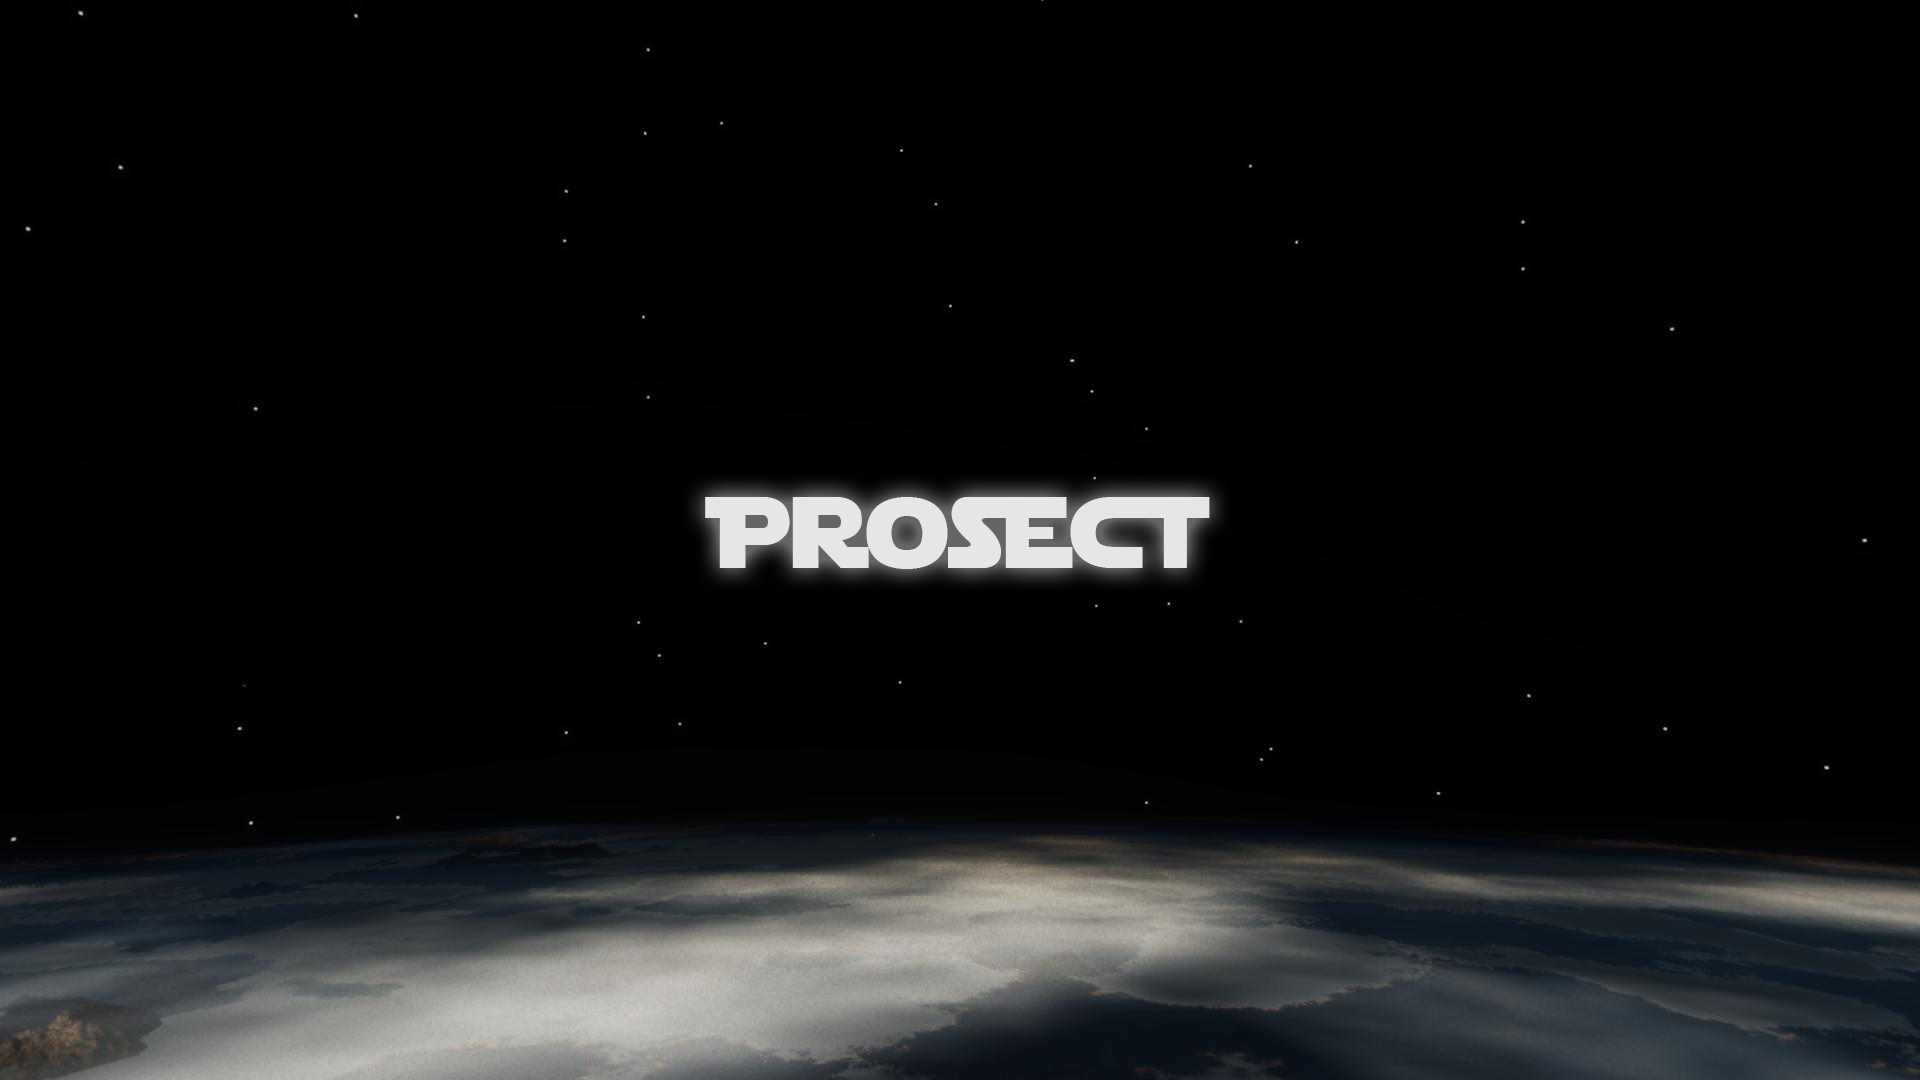 Prosect